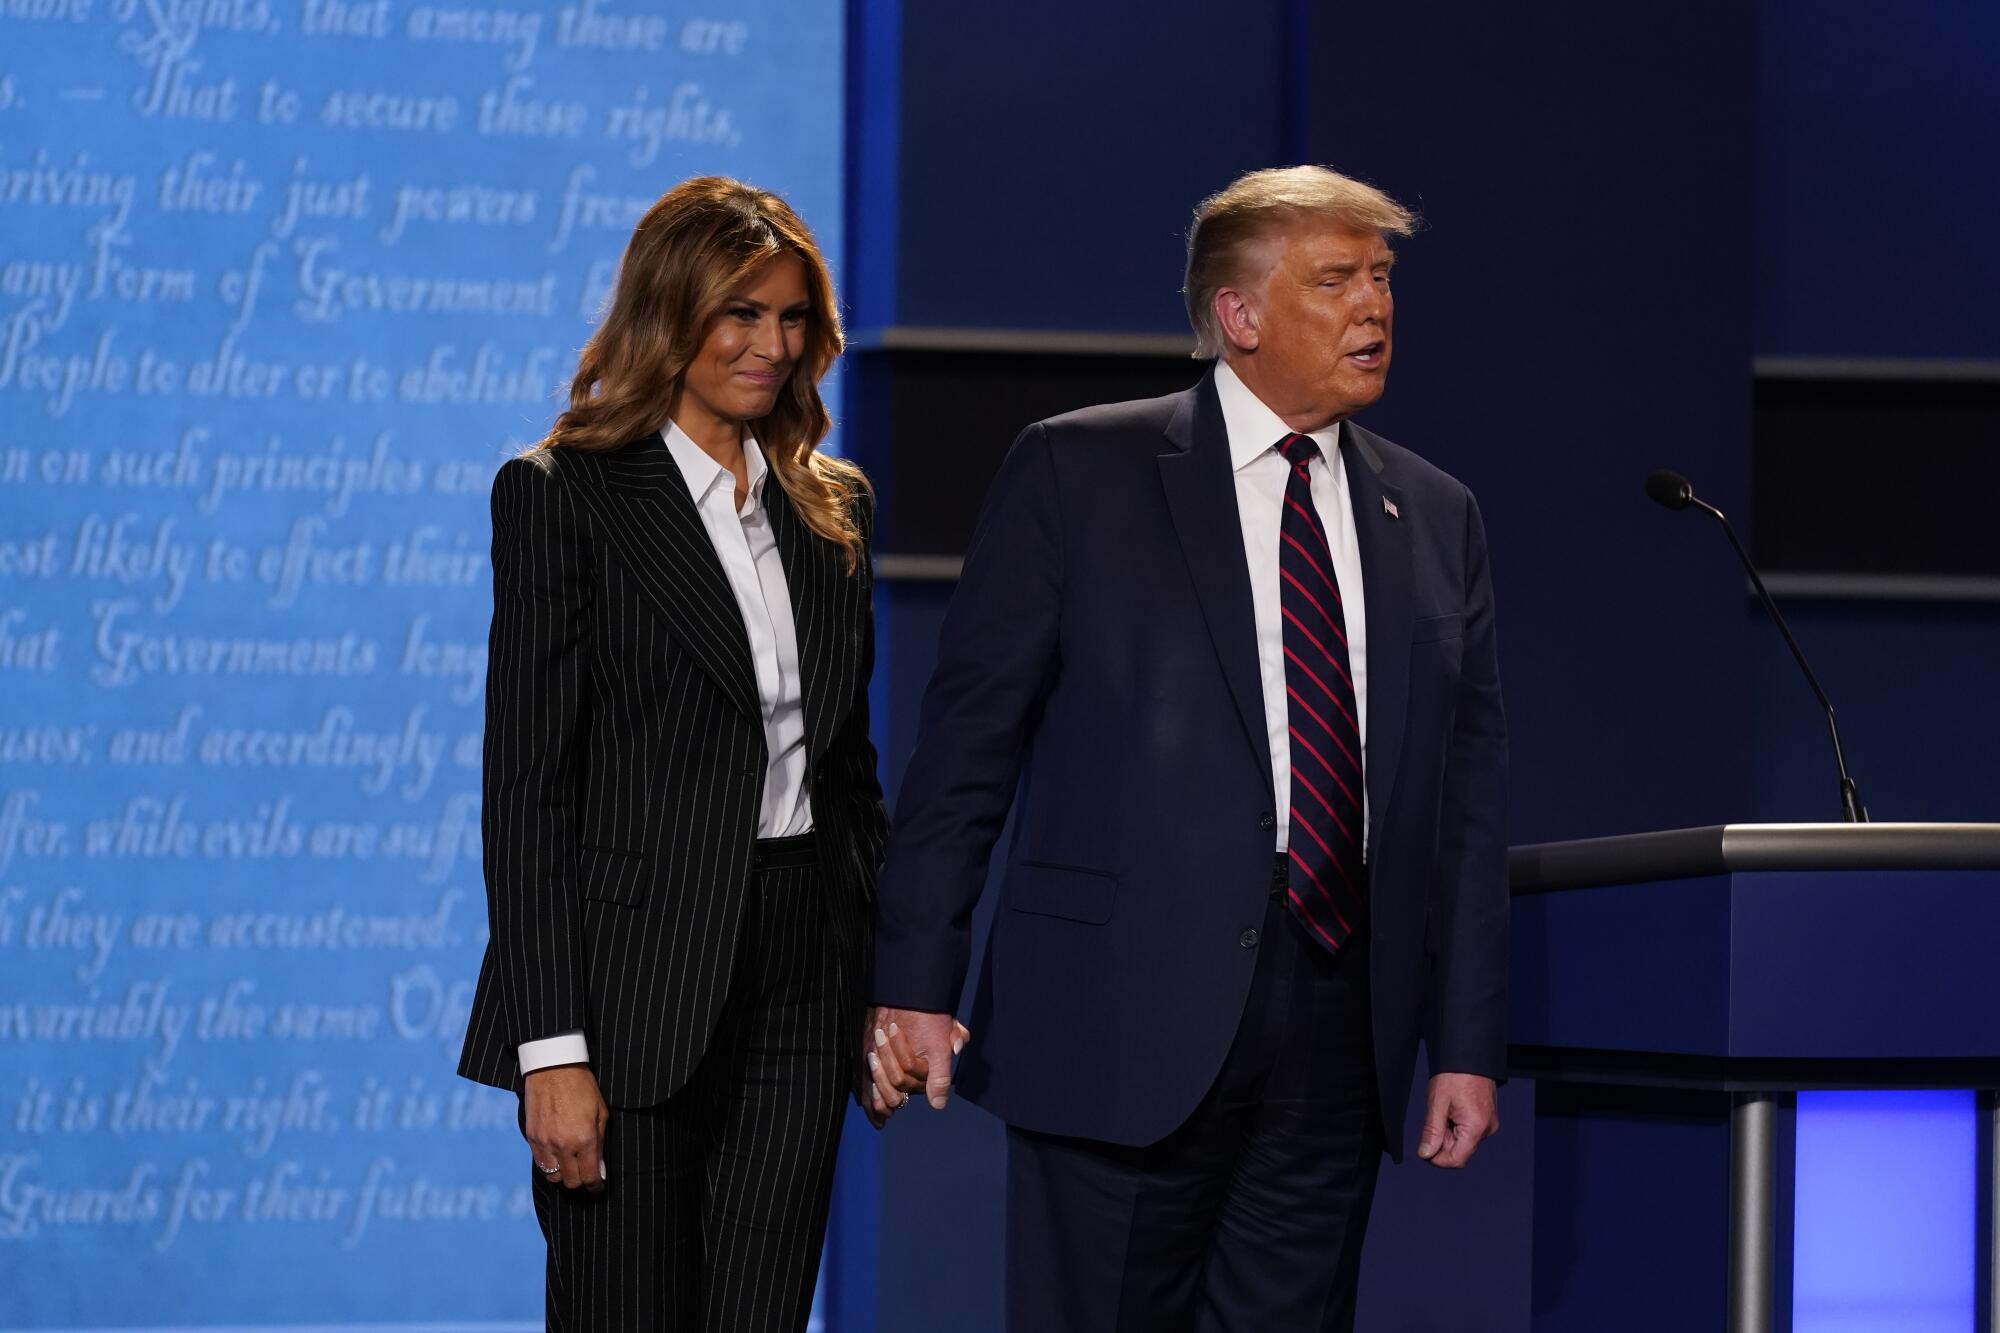 President Trump and First Lady Melania Trump on stage after the first presidential debate